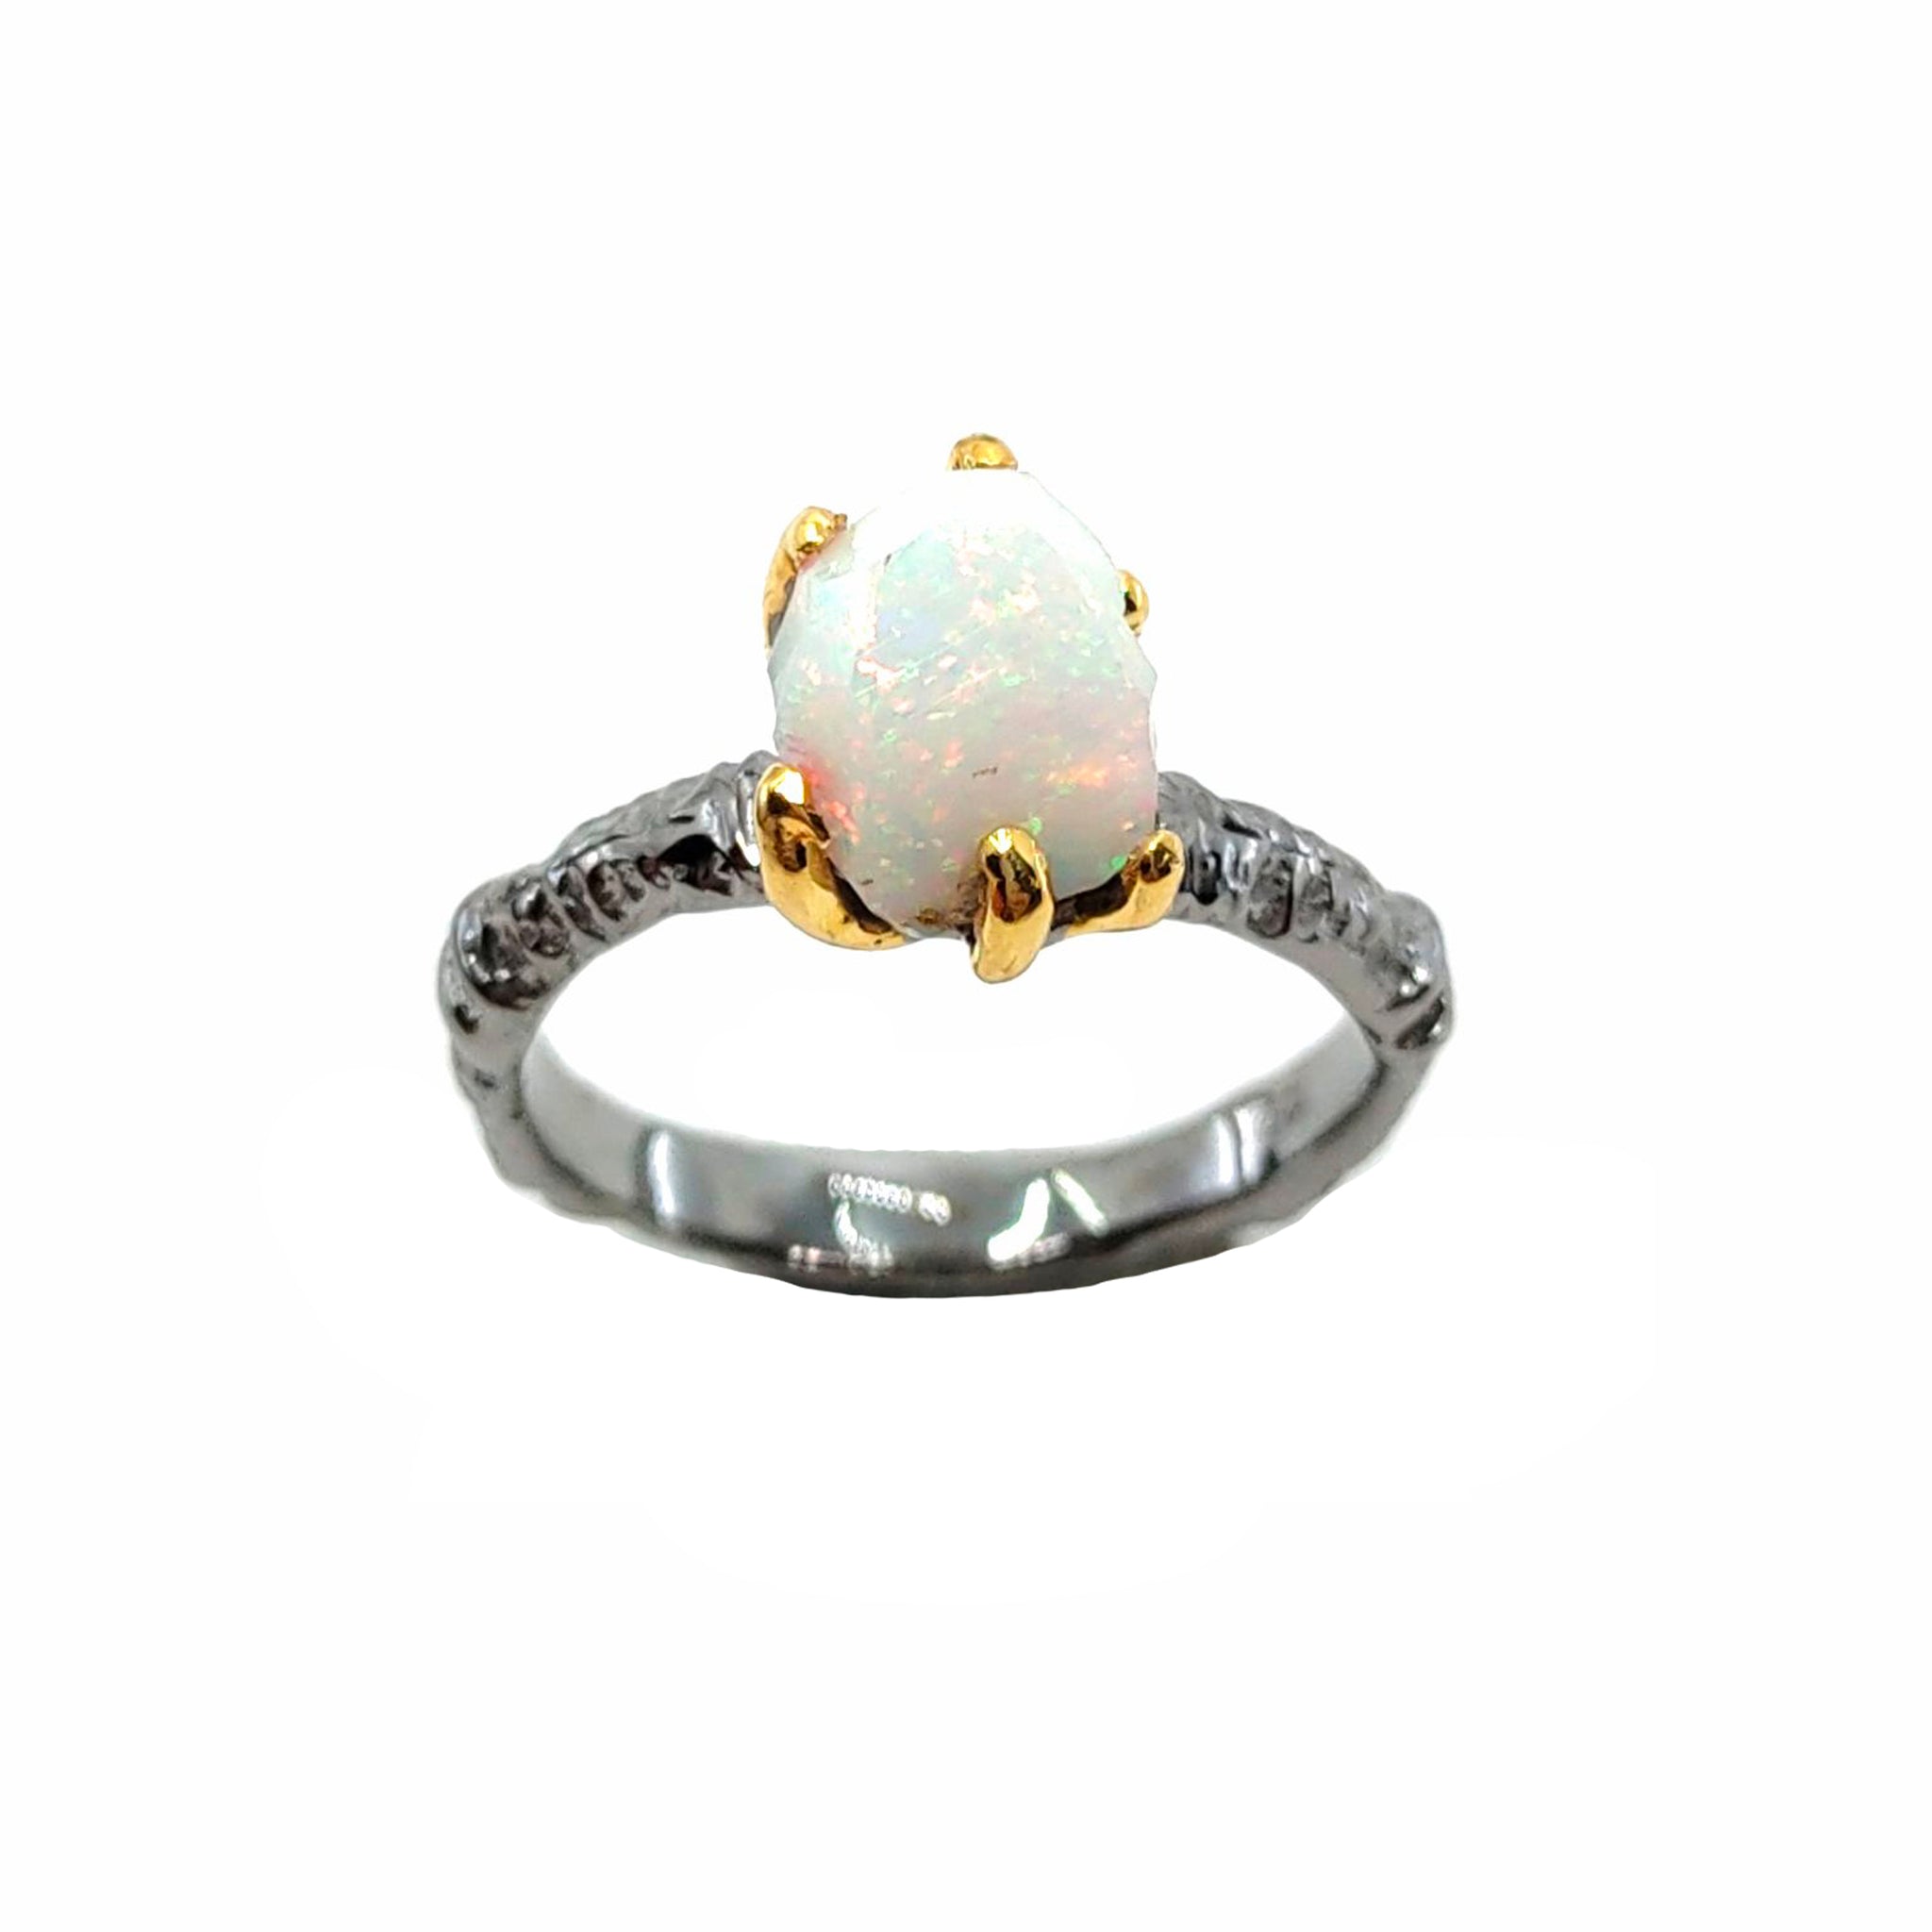 Rough Stone - 925 Sterling Silver Ring, Rough Faceted Ethiopian Opal, Plated with 3 Micron 22K Yellow Gold and Grey Ruthenium